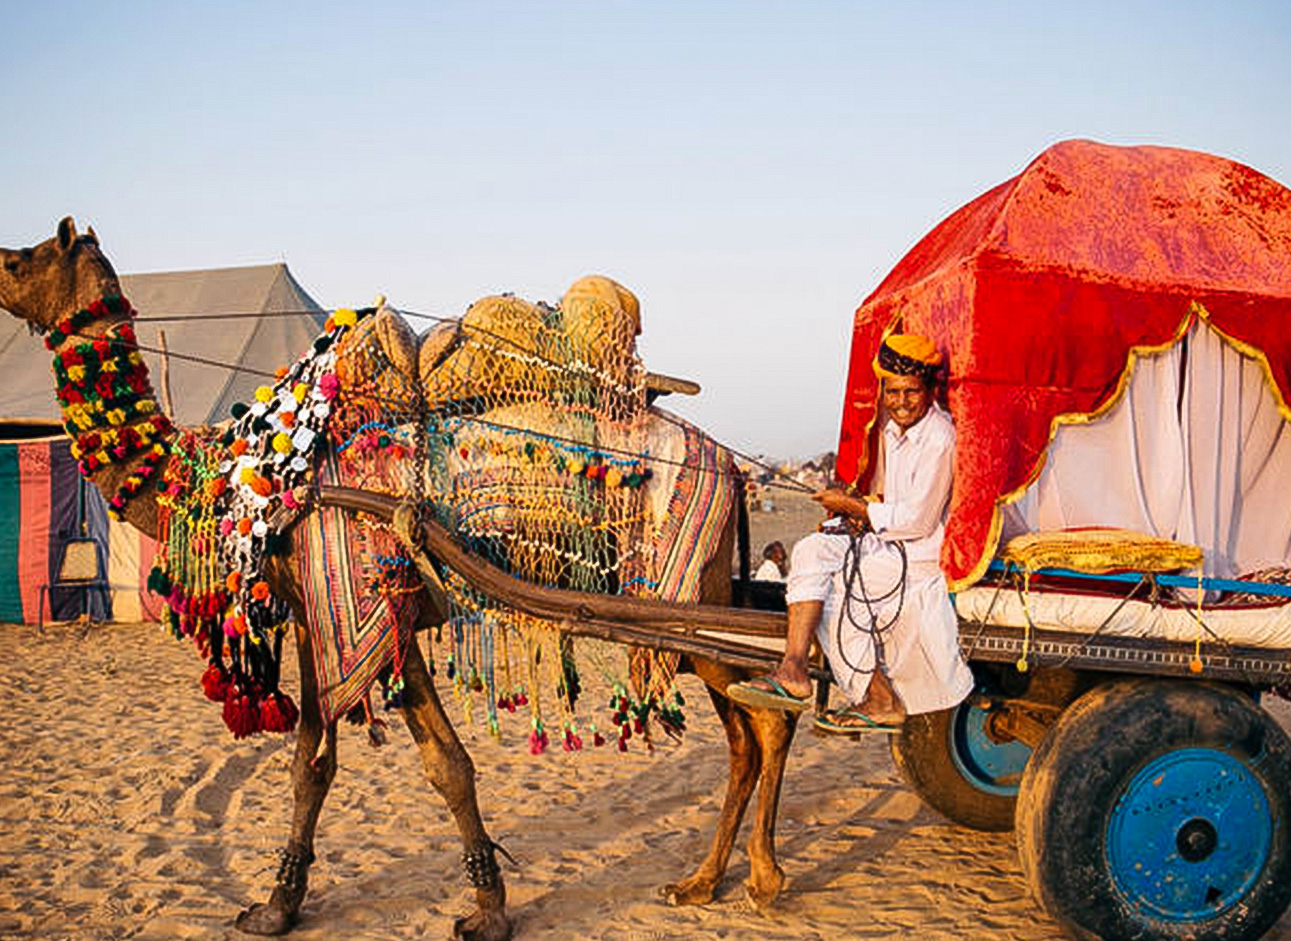 Camel Cart - Traditional transportation in scenic landscapes